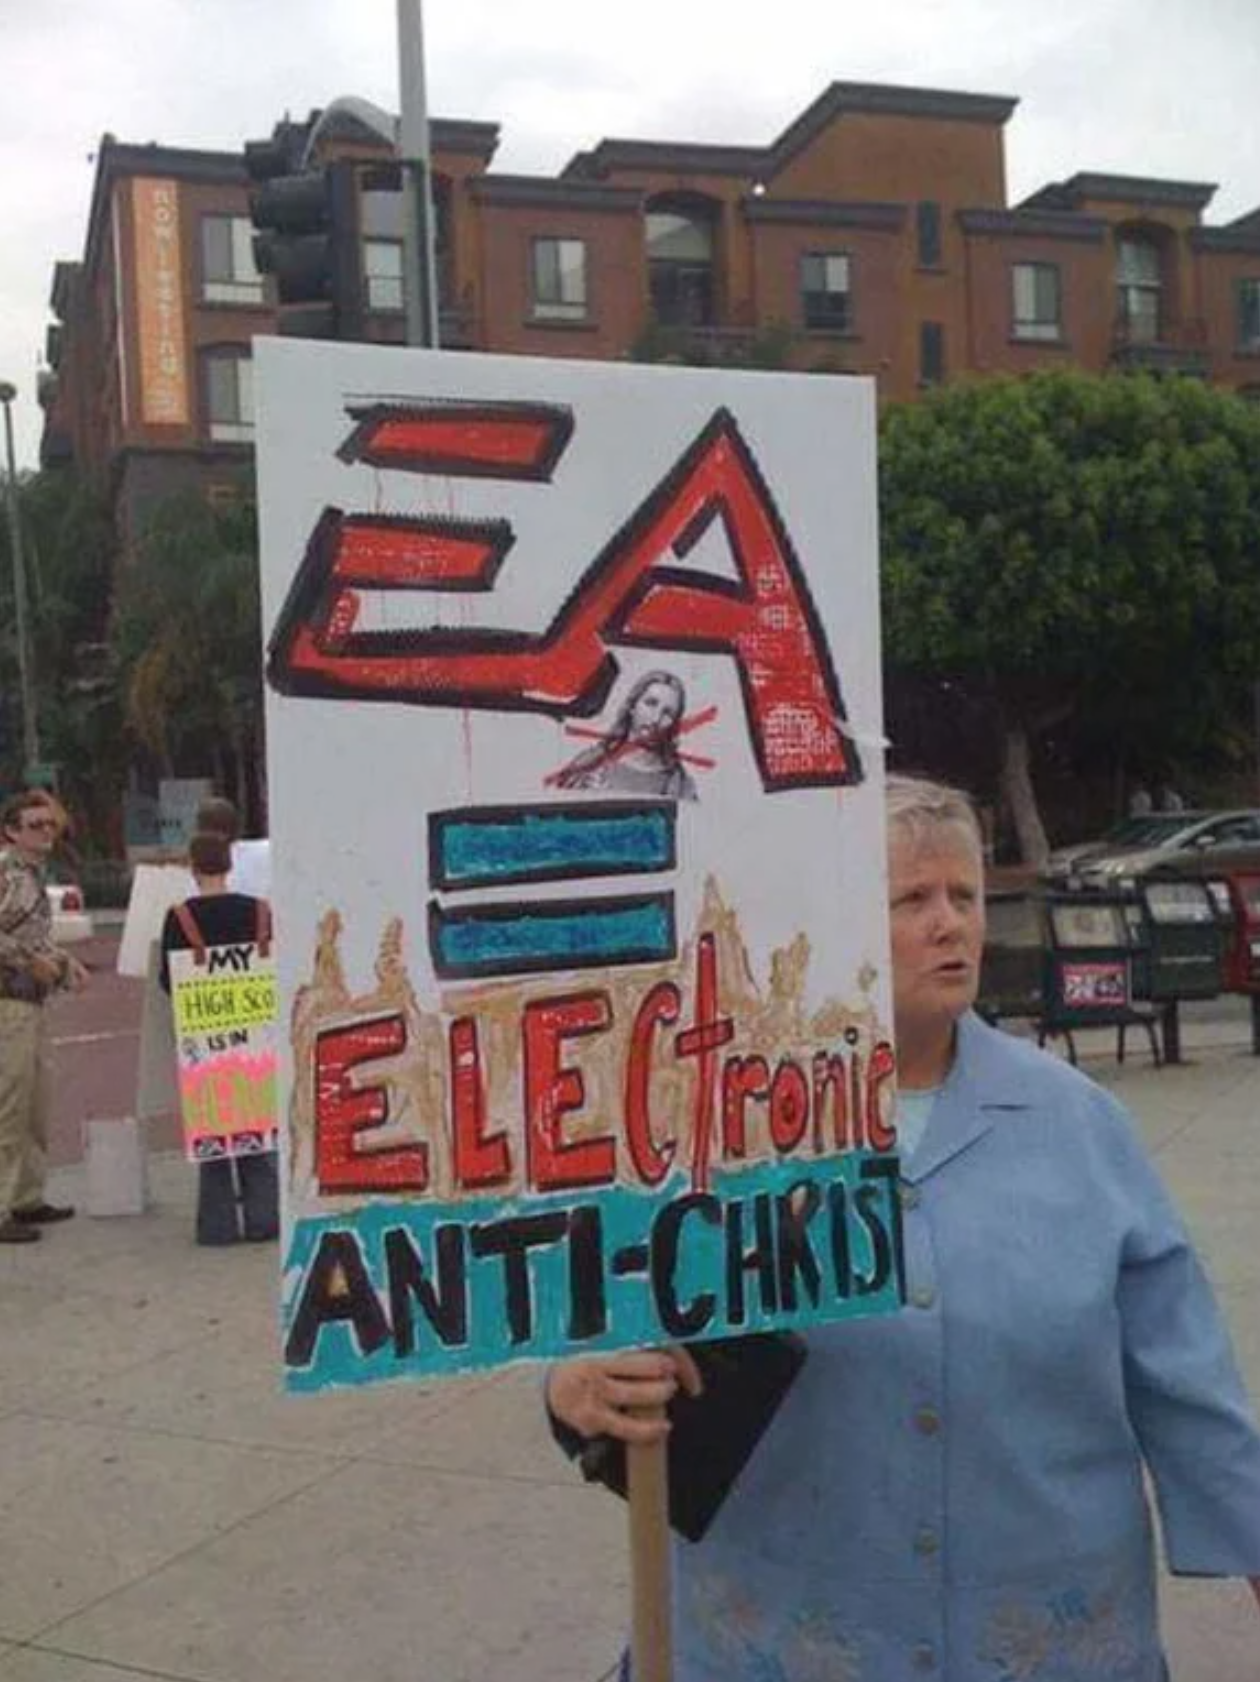 electronic antichrist - Ea My Hoes Elect AntiChrist